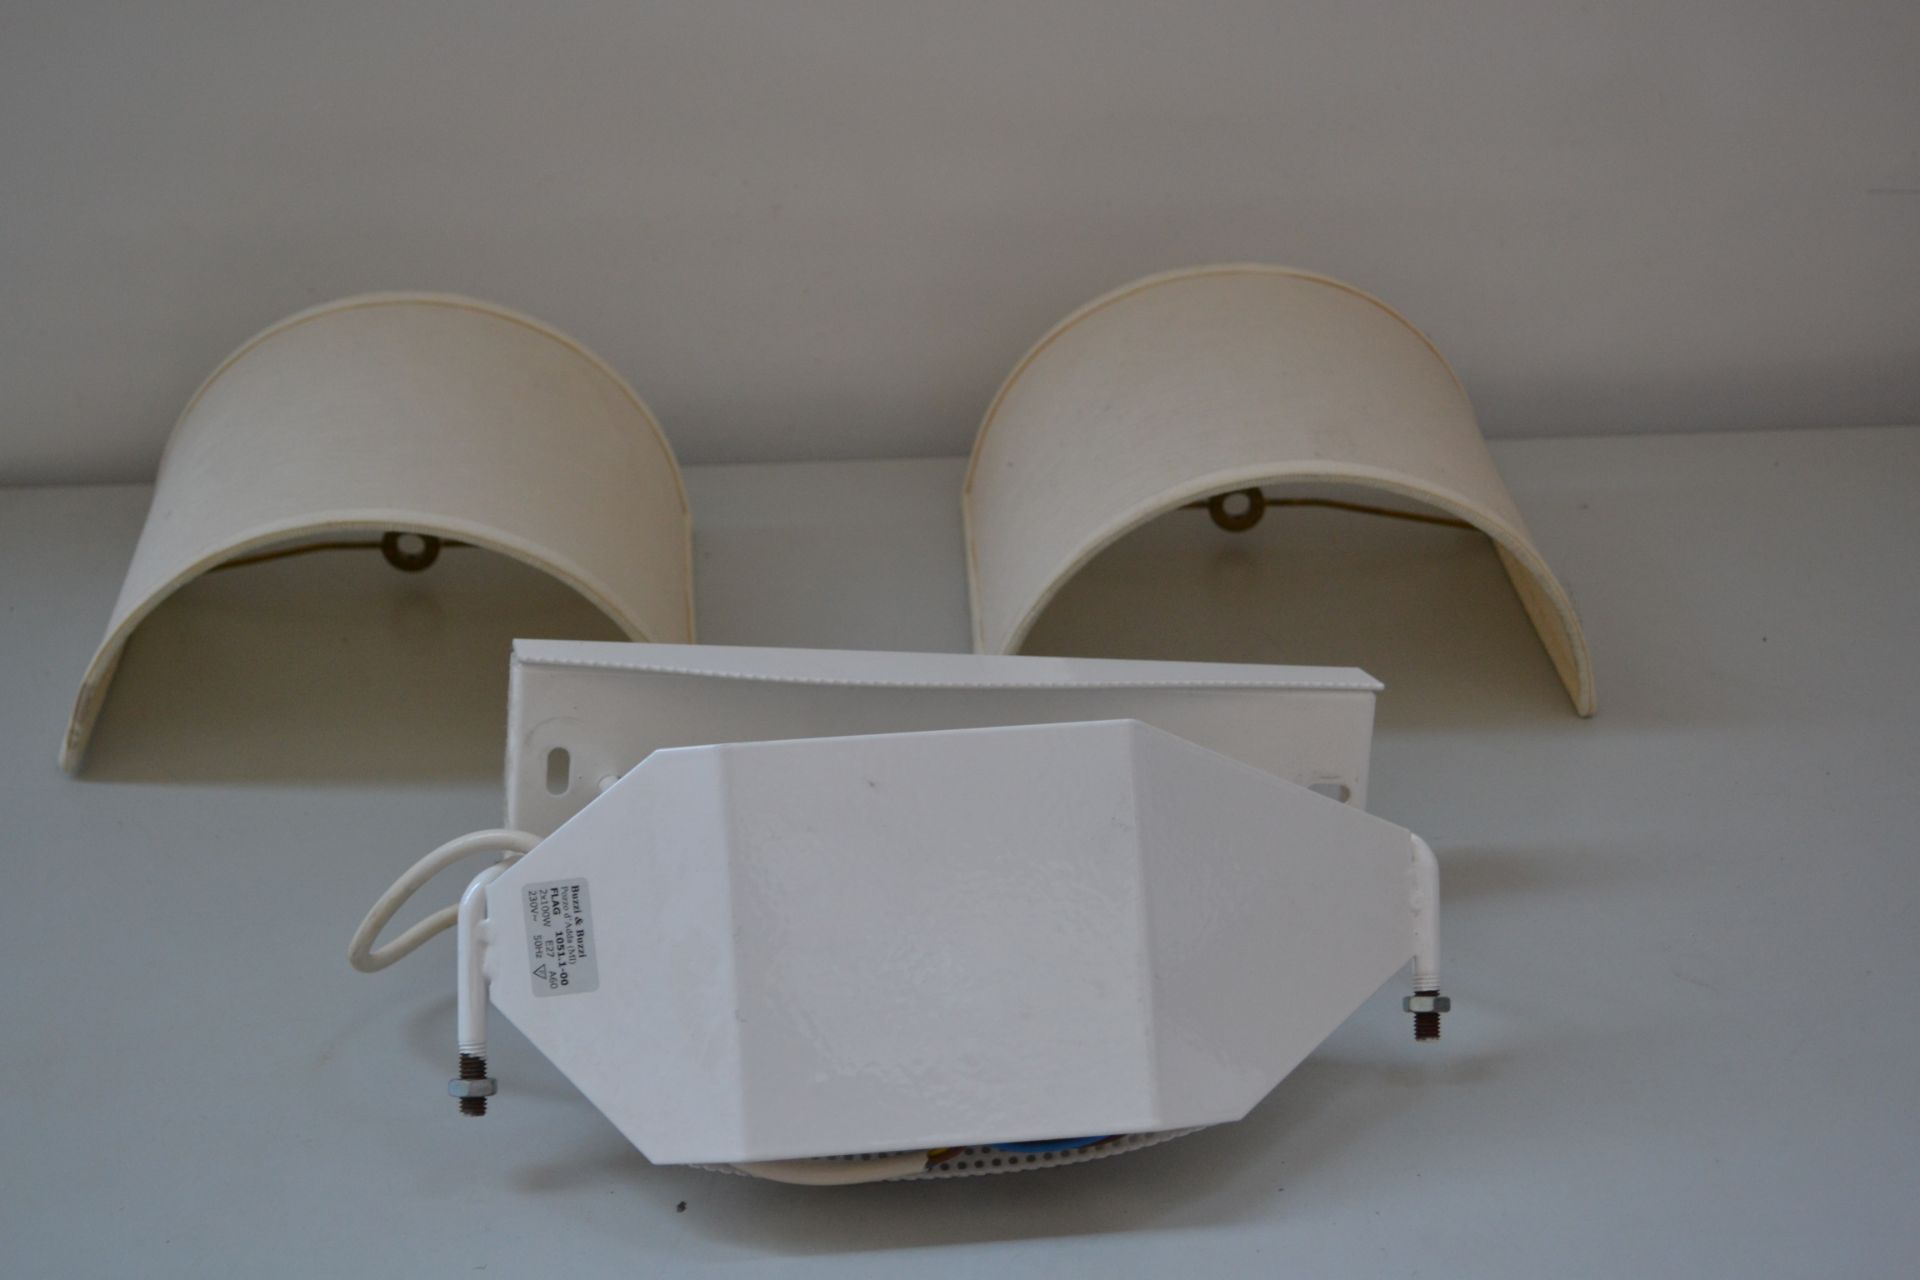 1 x Pair of Wall Light Shades In Cream And Buzzi & Buzzi White Wall Light - Ref J2191 - CL314